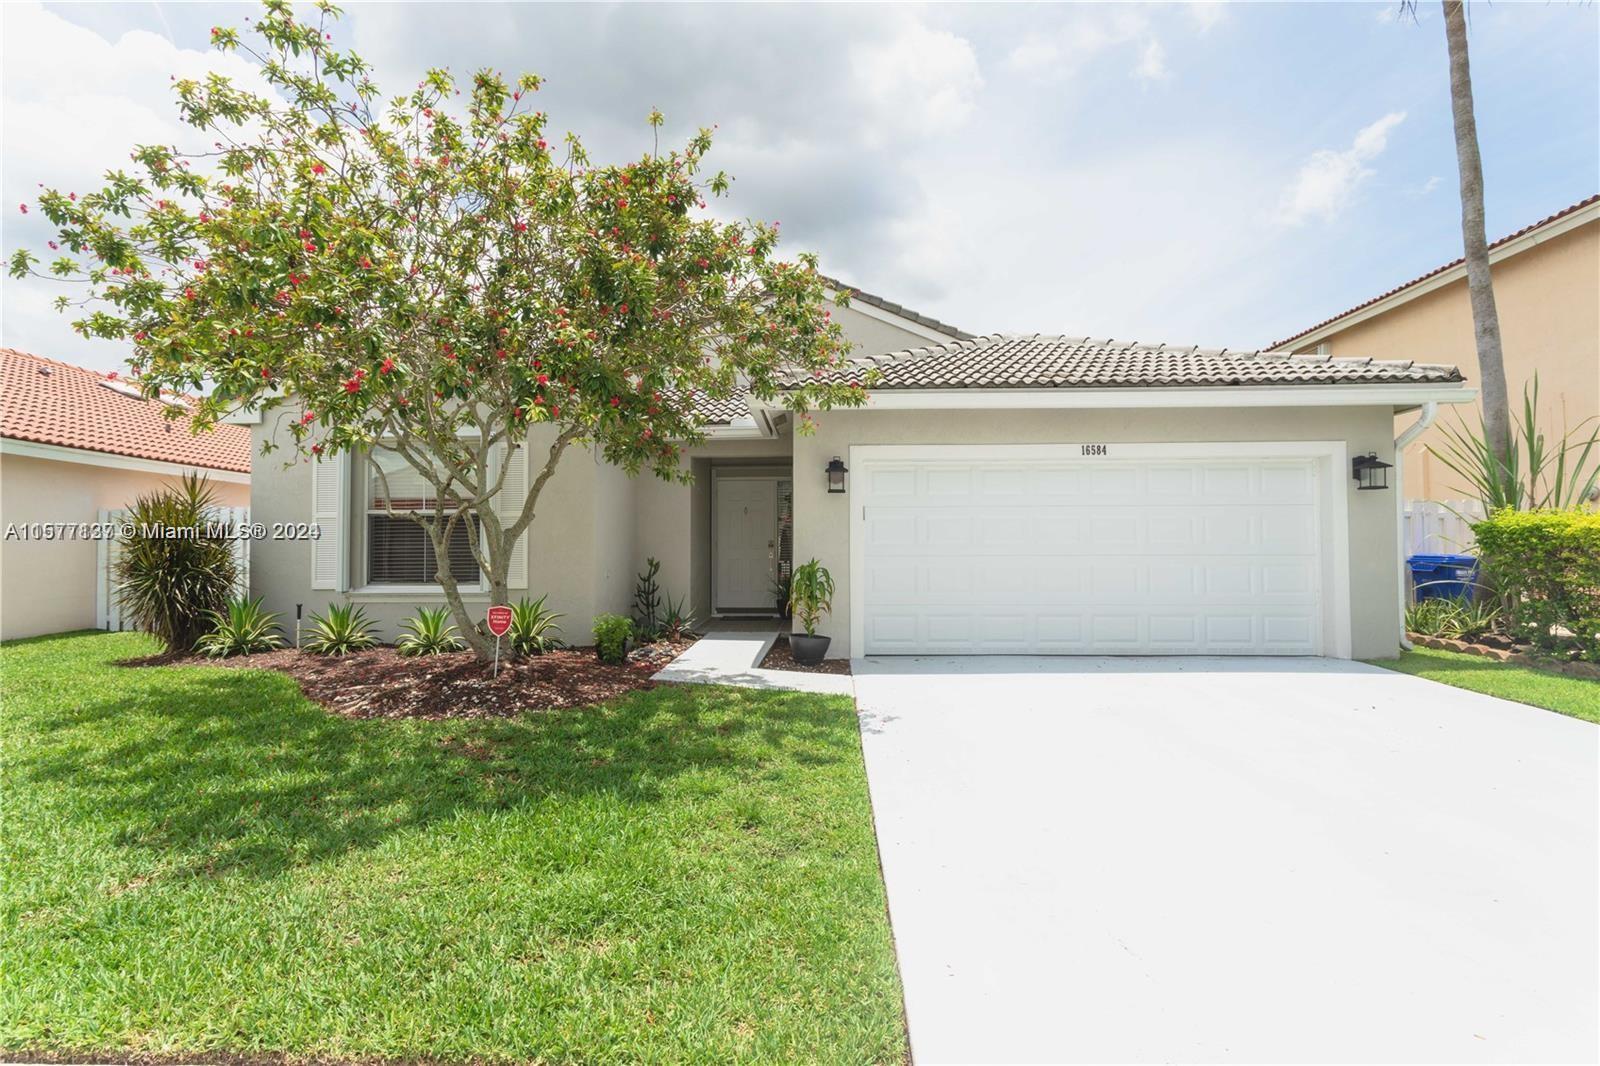 Photo of 16584 NW 10th St in Pembroke Pines, FL